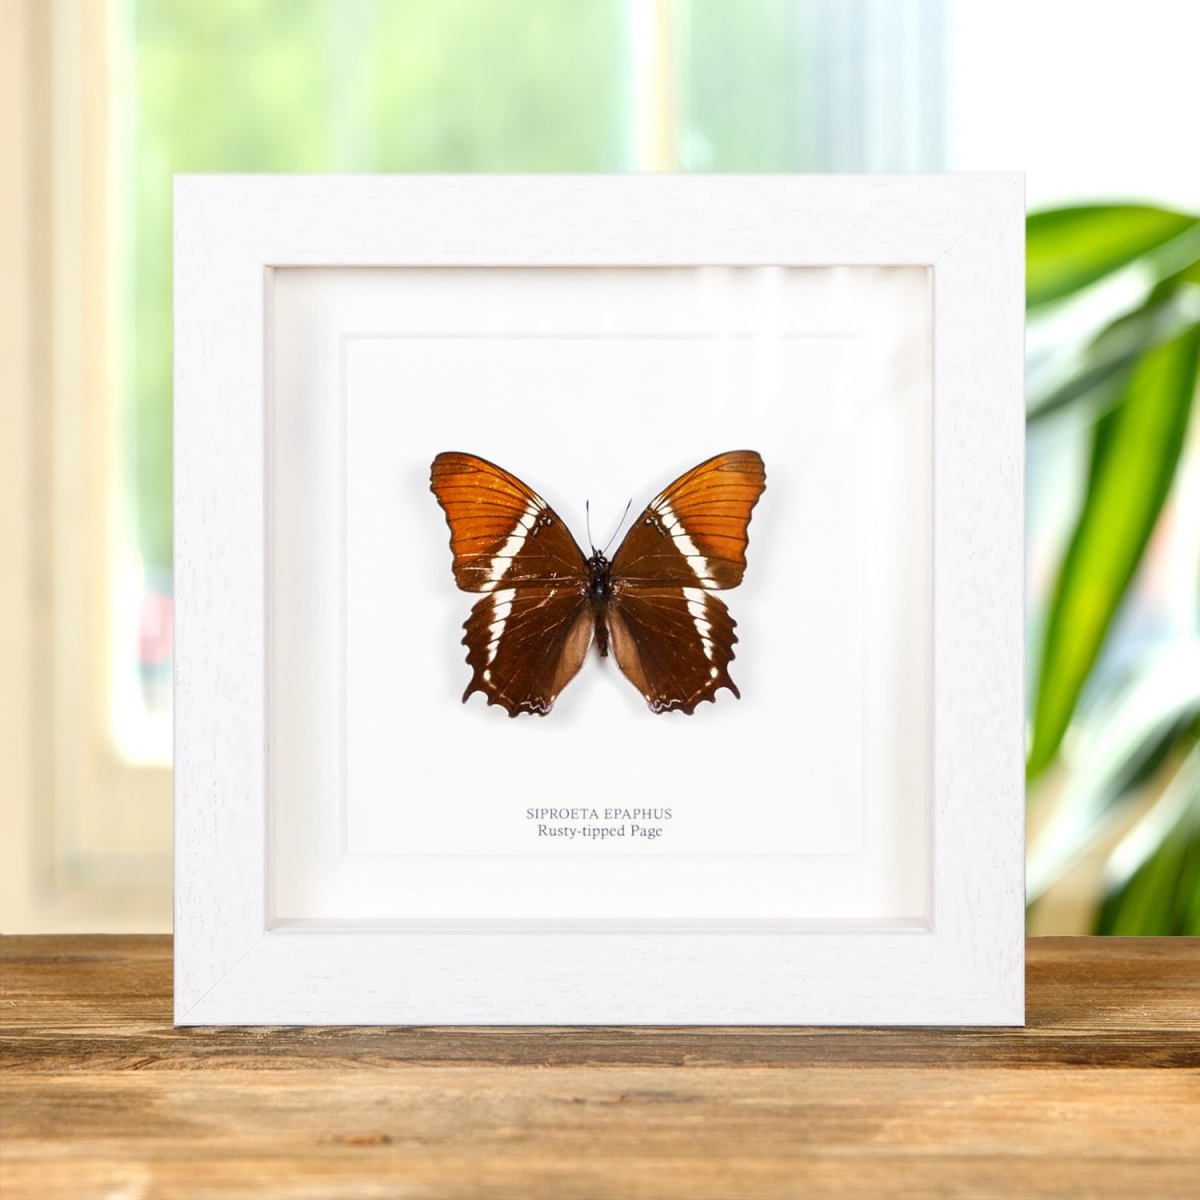 Rusty-tipped Page in Box Frame (Siproeta epaphus)